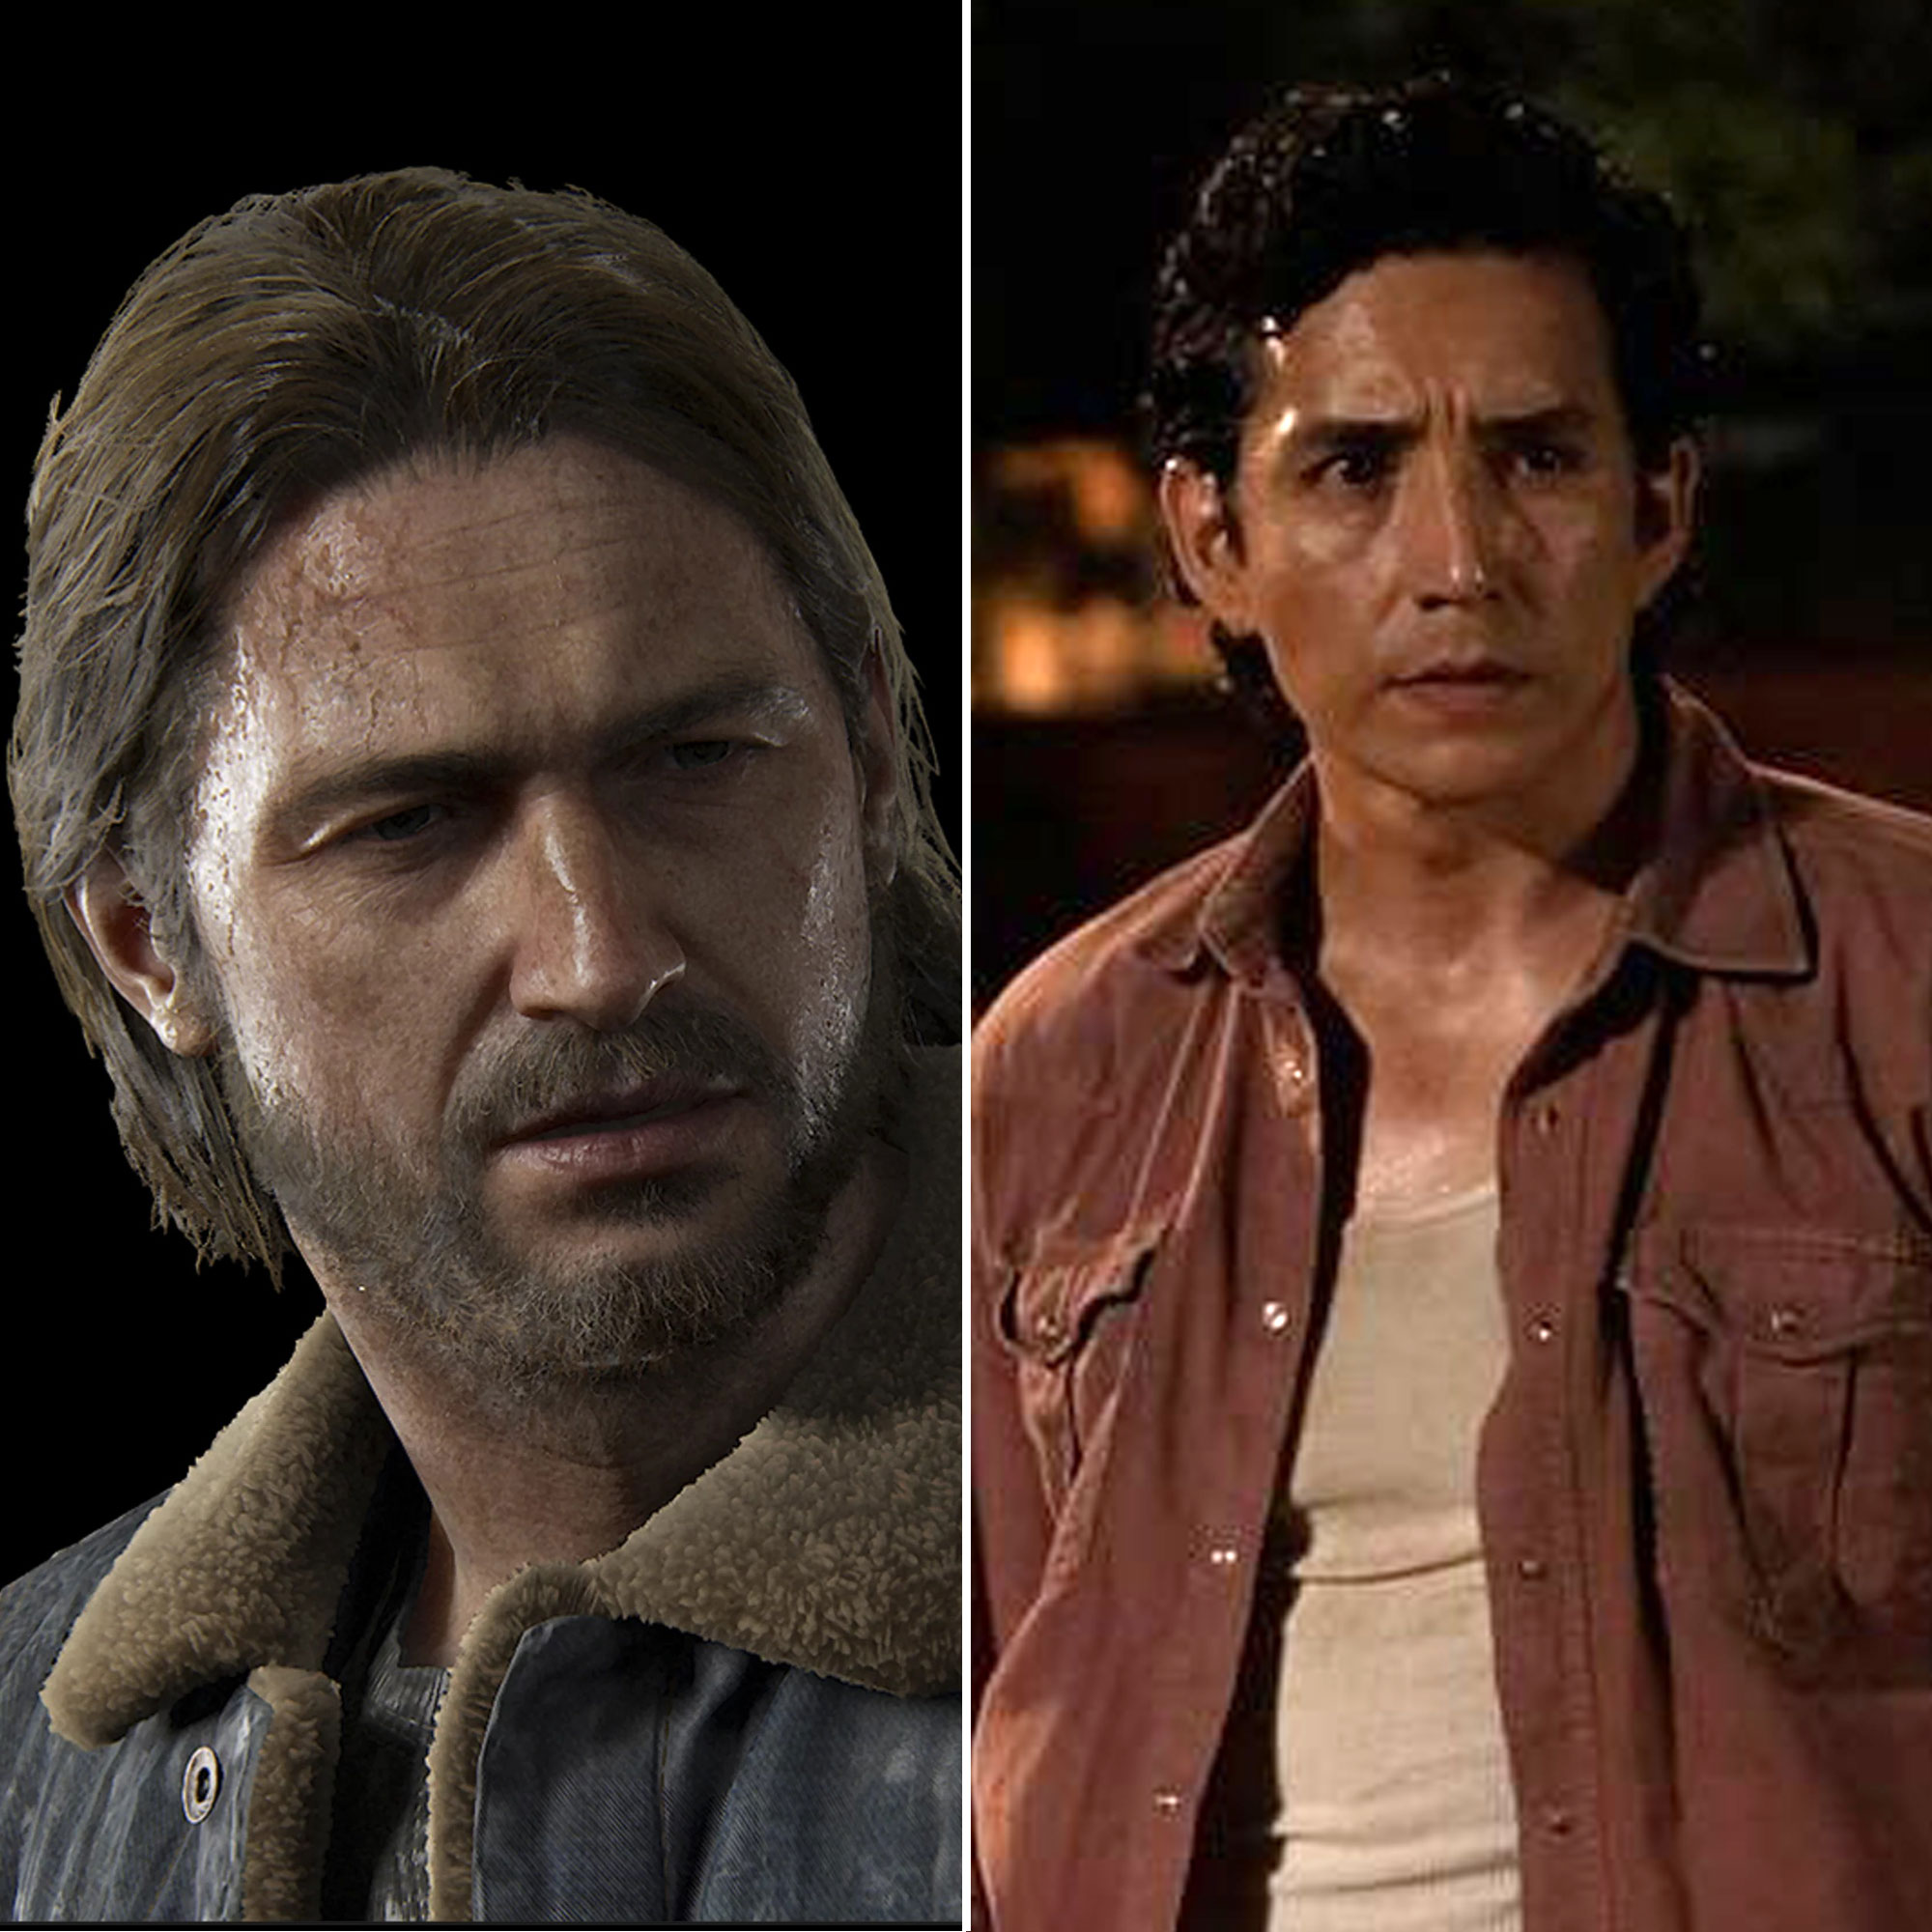 Last of Us' Series at HBO Casts Gabriel Luna as Tommy